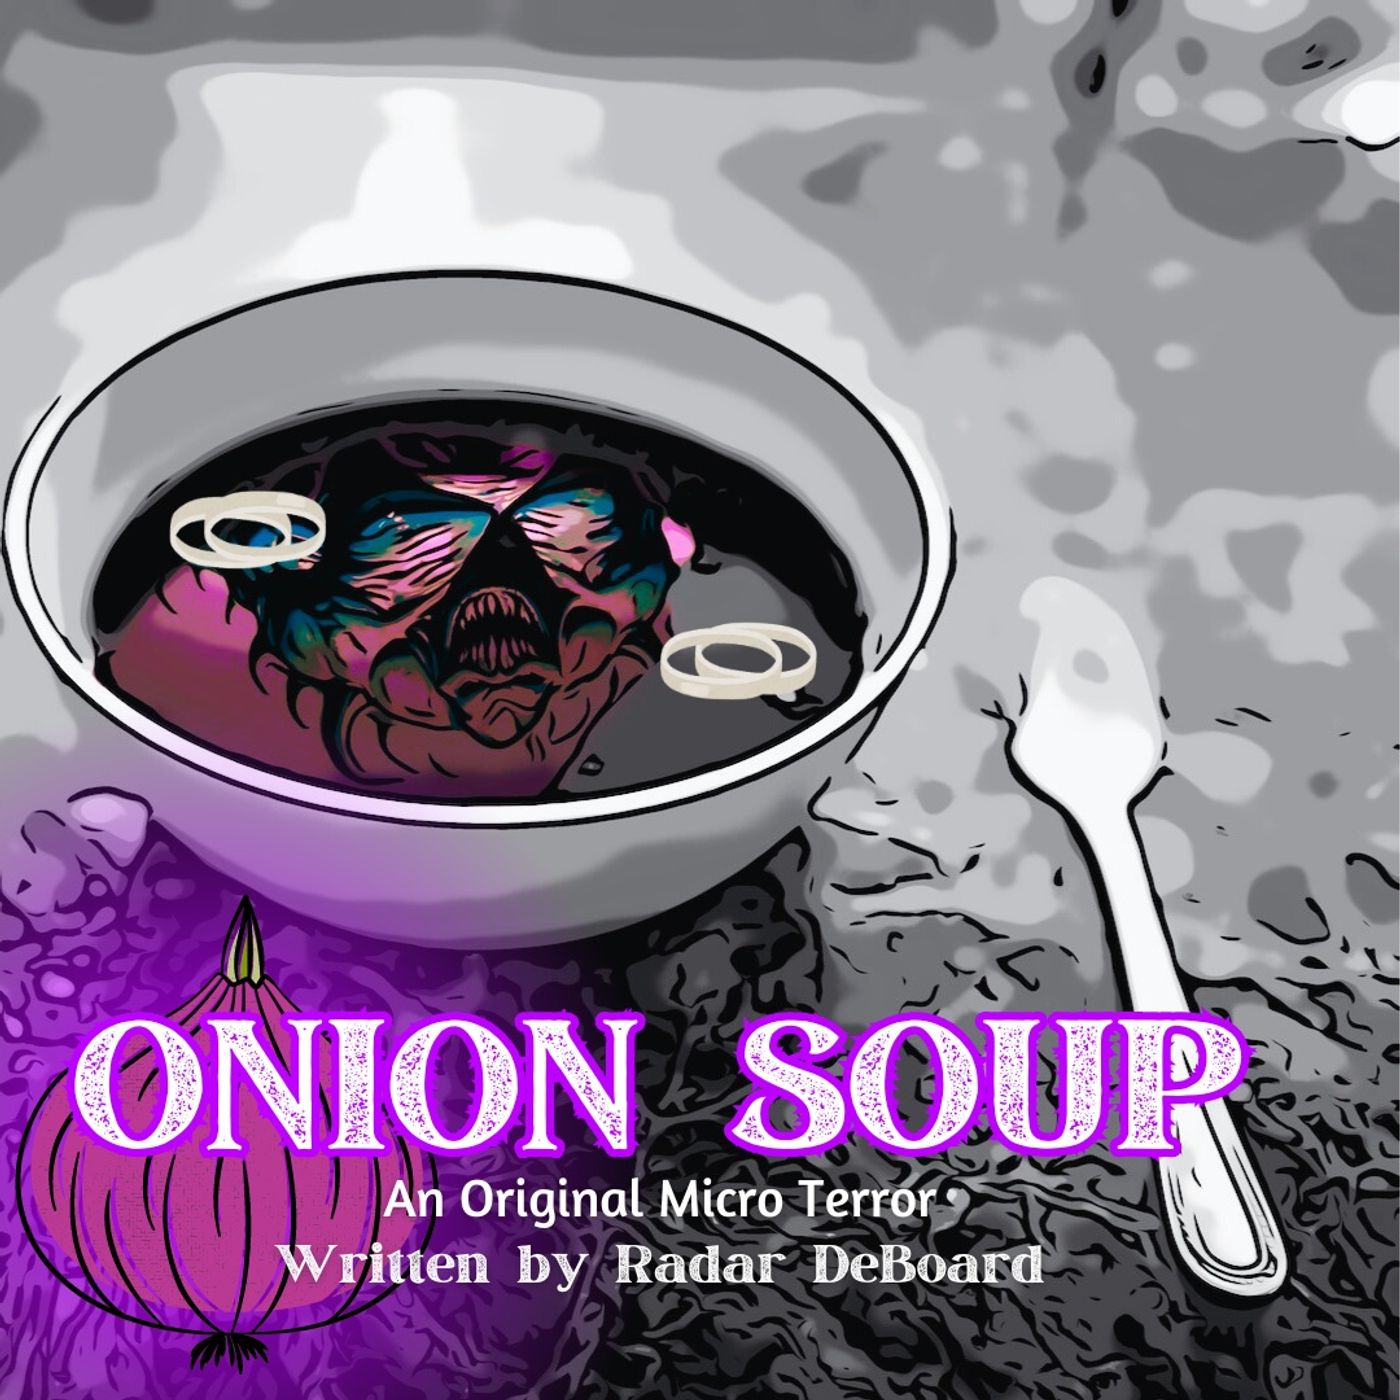 “ONION SOUP” by Radar DeBoard #MicroTerrors